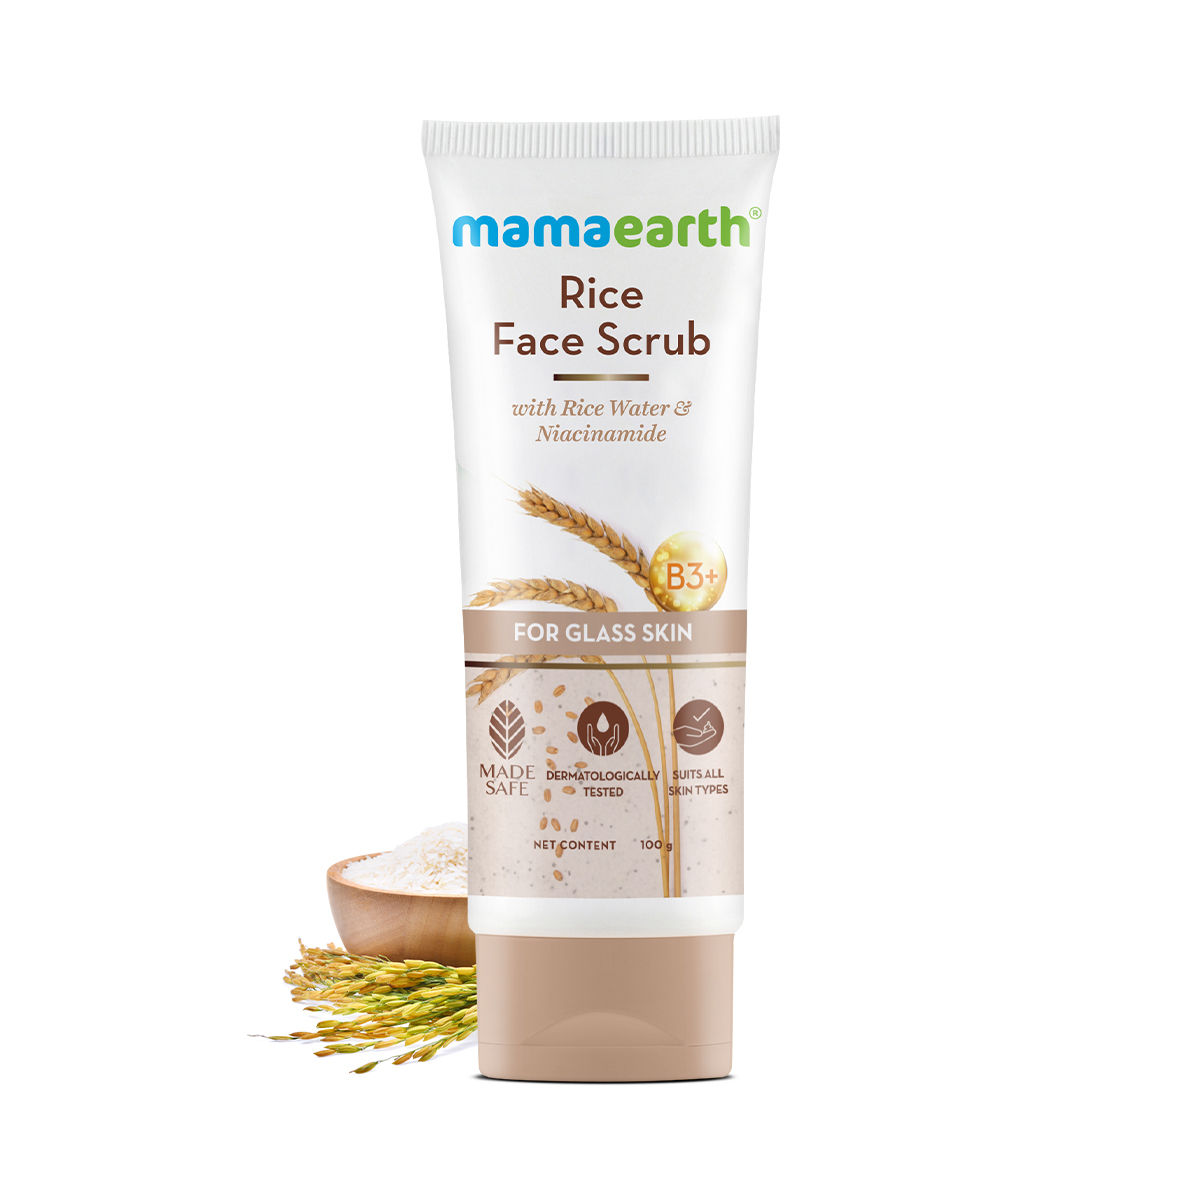 Mamaearth Rice Face Scrub For Glowing Skin With Rice Water & Niacinamide For Glass Skin